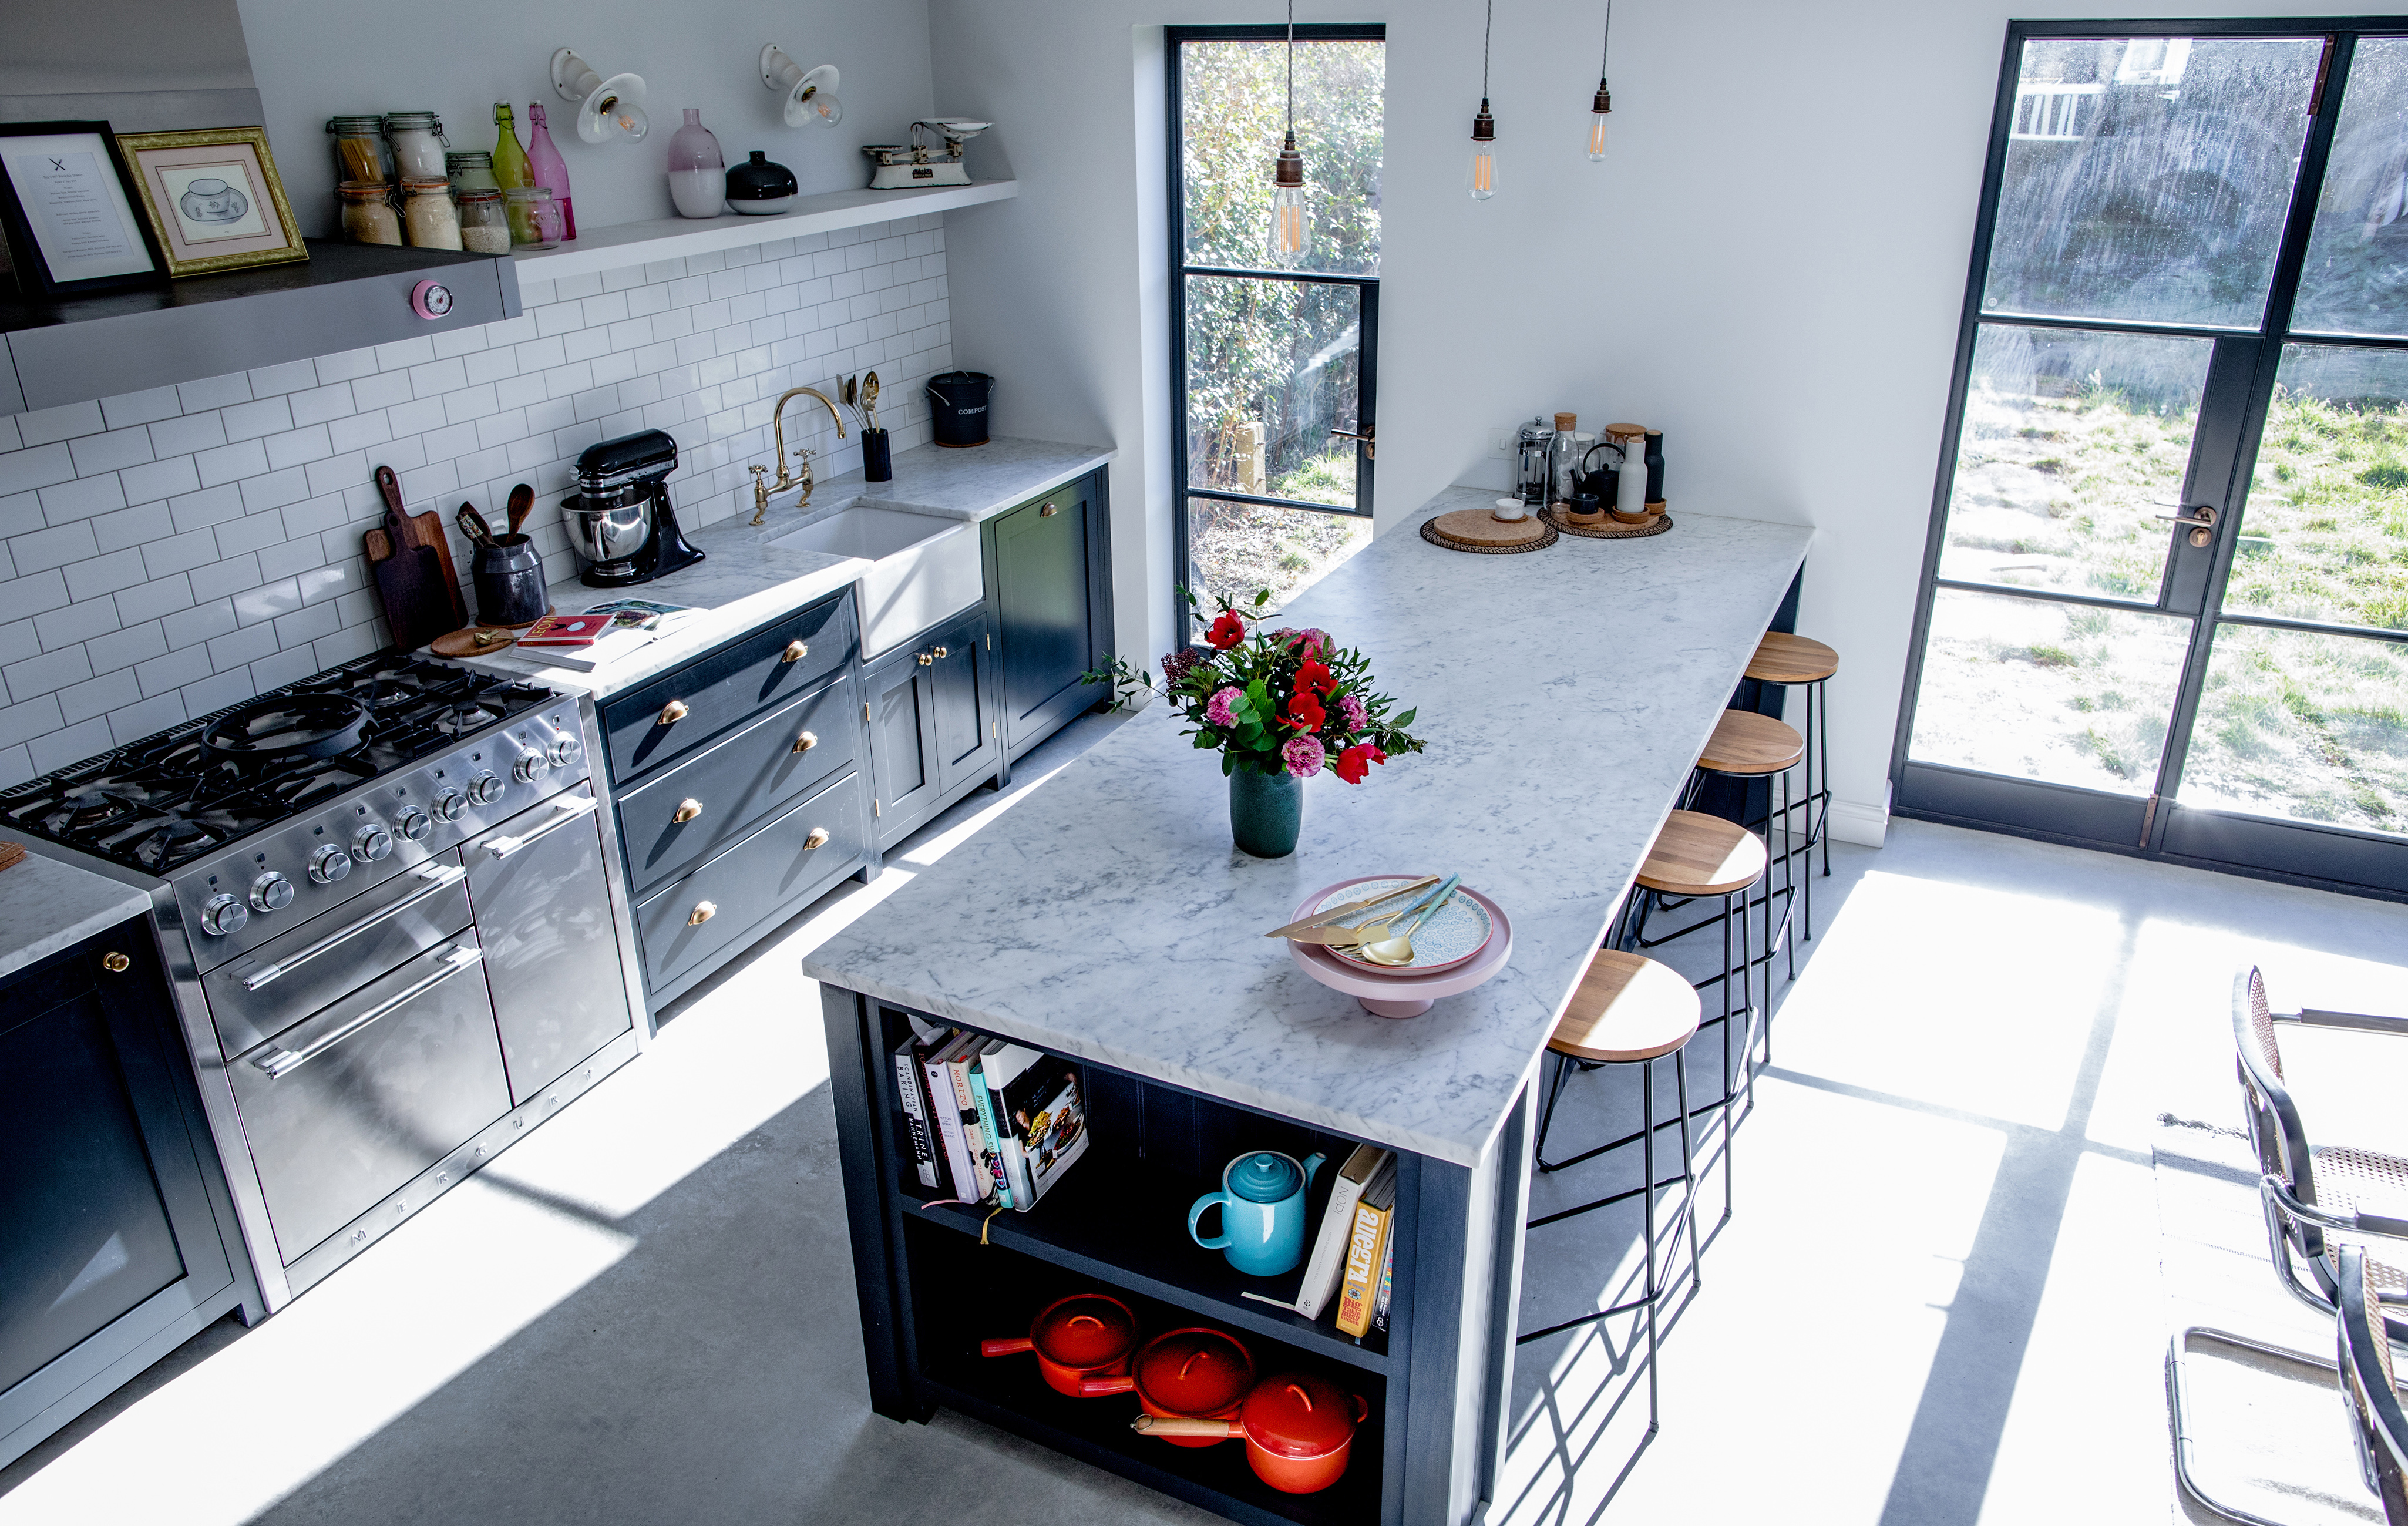 </p> <p>Find your ideal home design pro on designfor-me.com - get matched and see who's interested in your home project. Click image to see more inspiration from our design pros</p> <p>Design by Sam, architect from Hackney, London</p> <p>#architecture #homedesign #modernhomes #homeinspiration #kitchens #kitchendesign #kitcheninspiration #kitchenideas #kitchengoals #glazing #architecturalglazing #naturallight </p> <p>